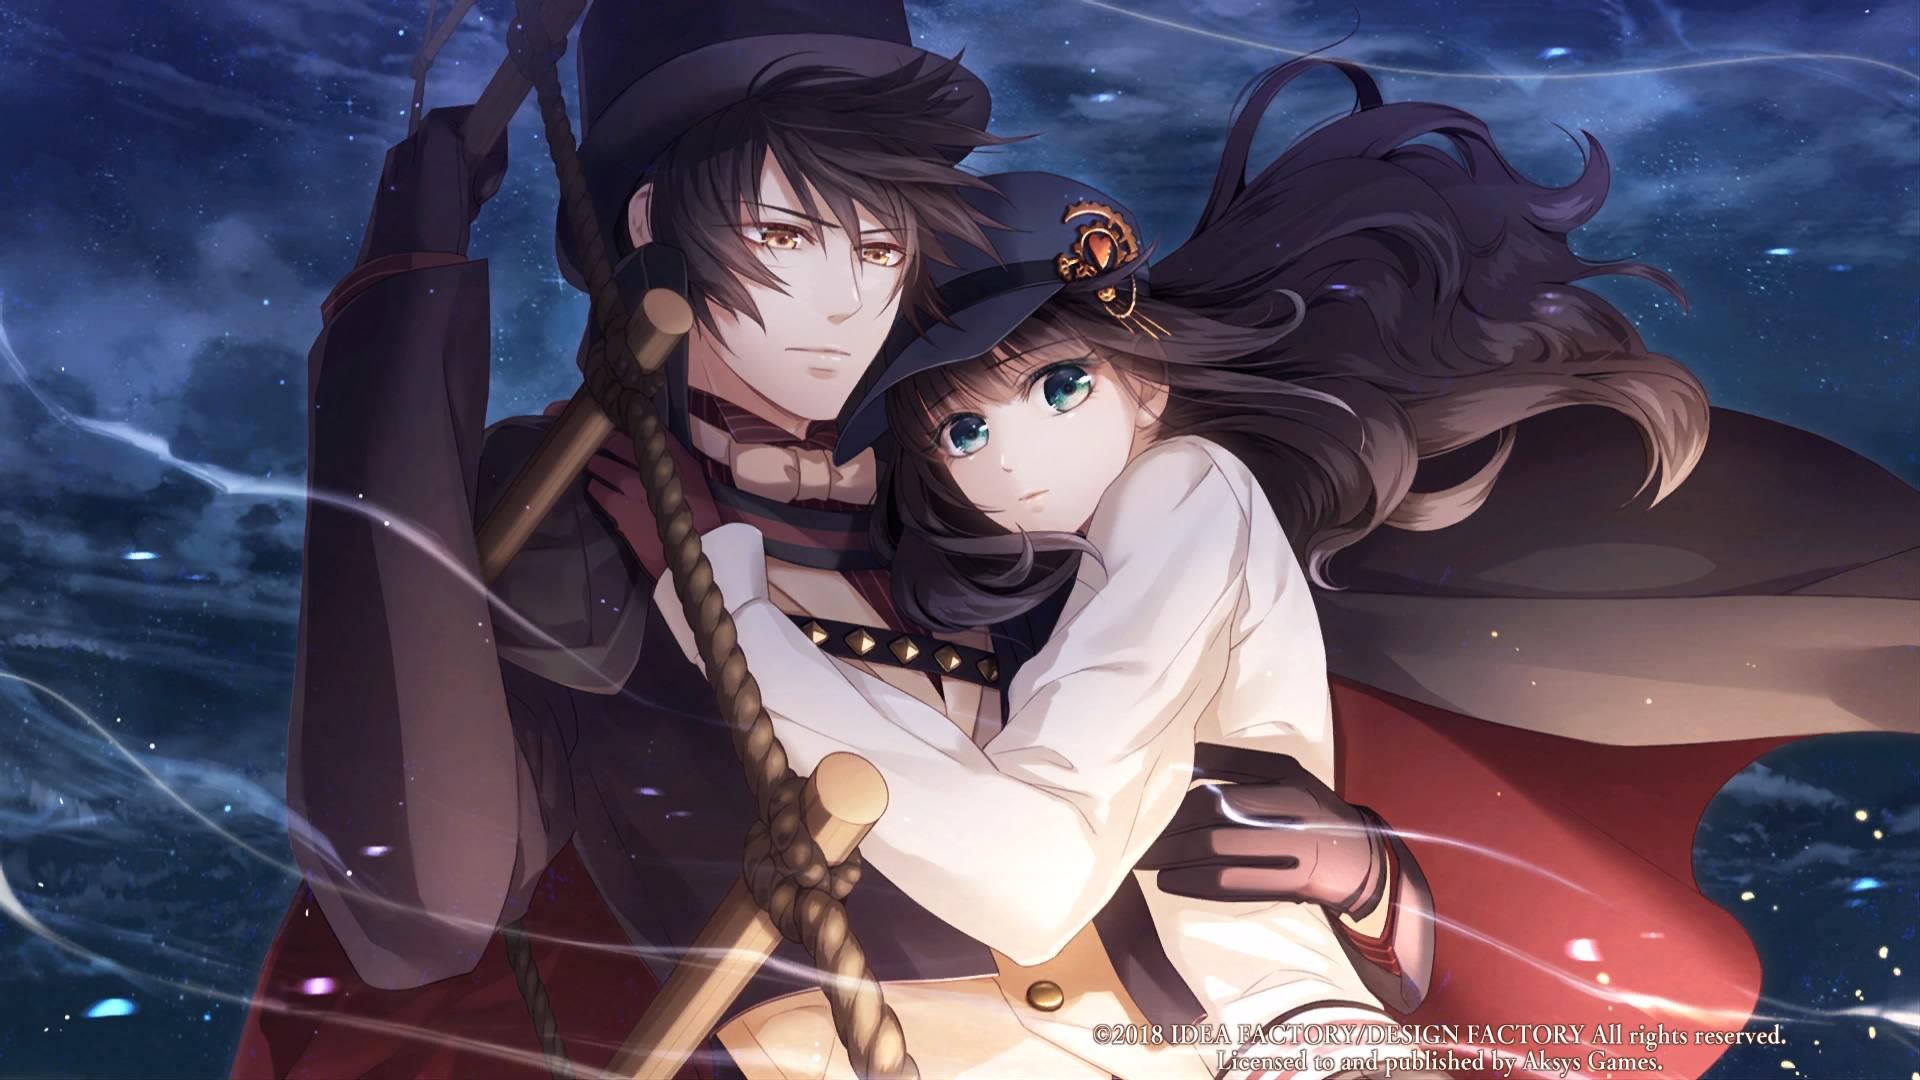 Code: Realize Guardian of Rebirth Coming to Switch